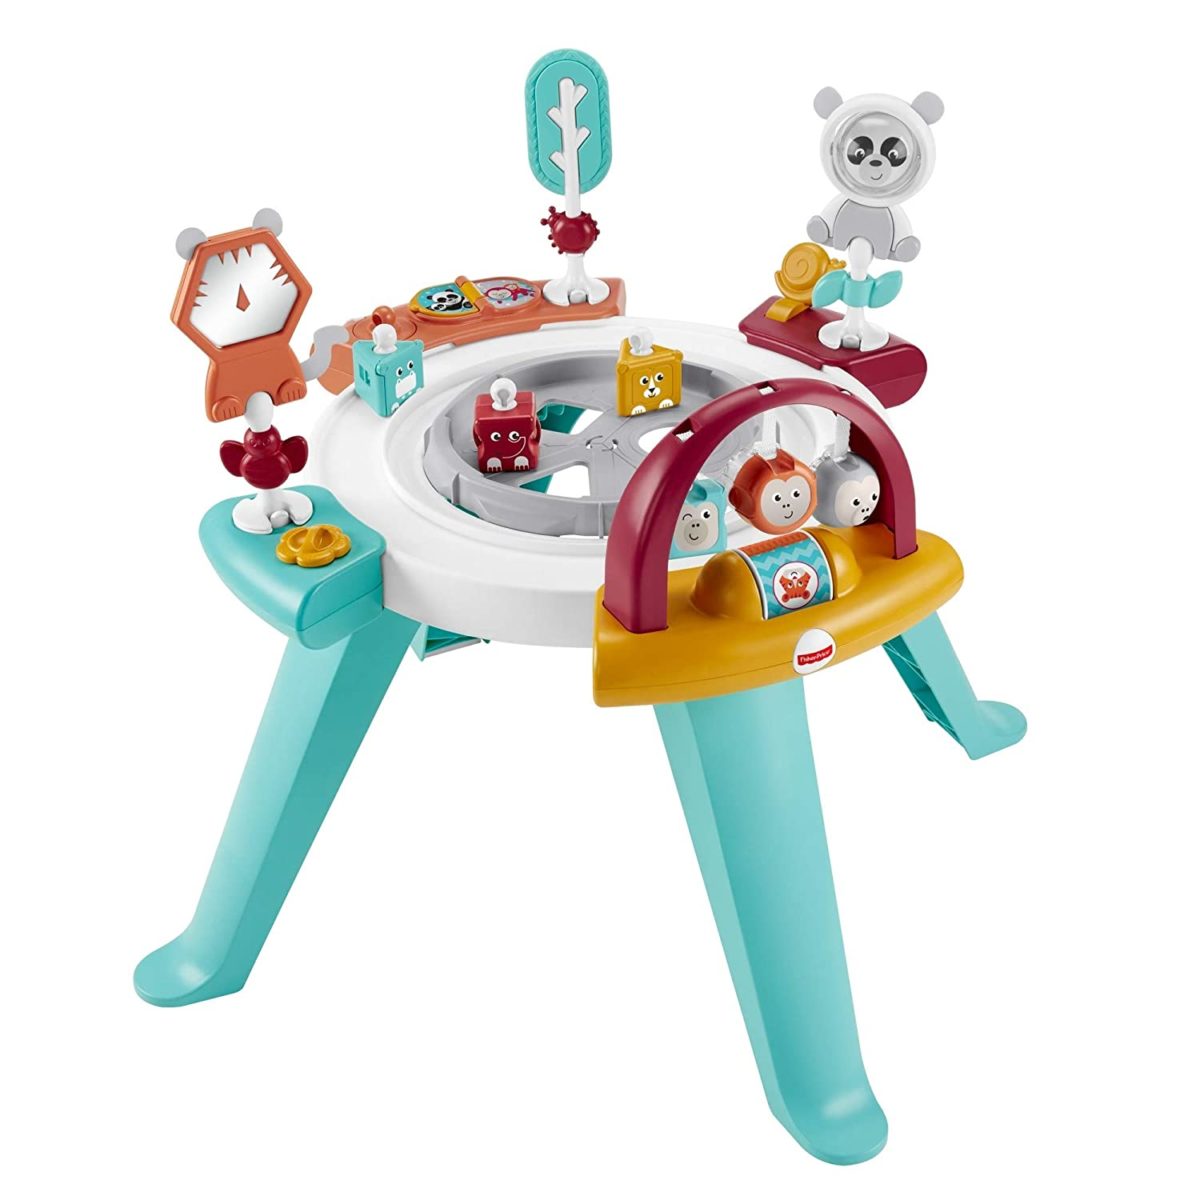 22 top quality fisher-price toys that also educational and entertaining